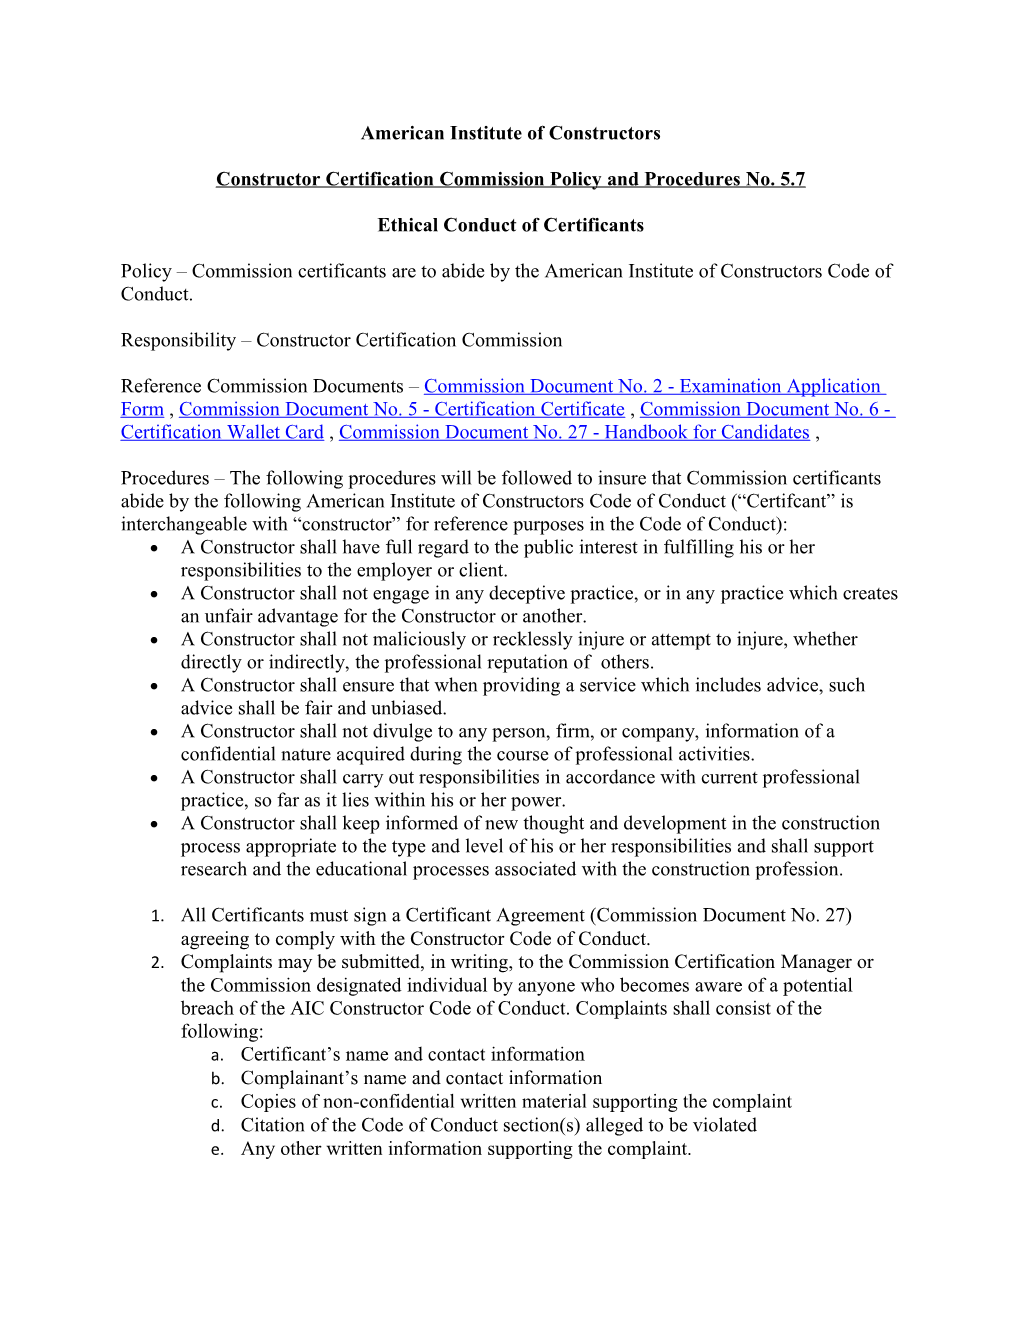 Constructor Certification Commission Policy and Procedures No. 5.7